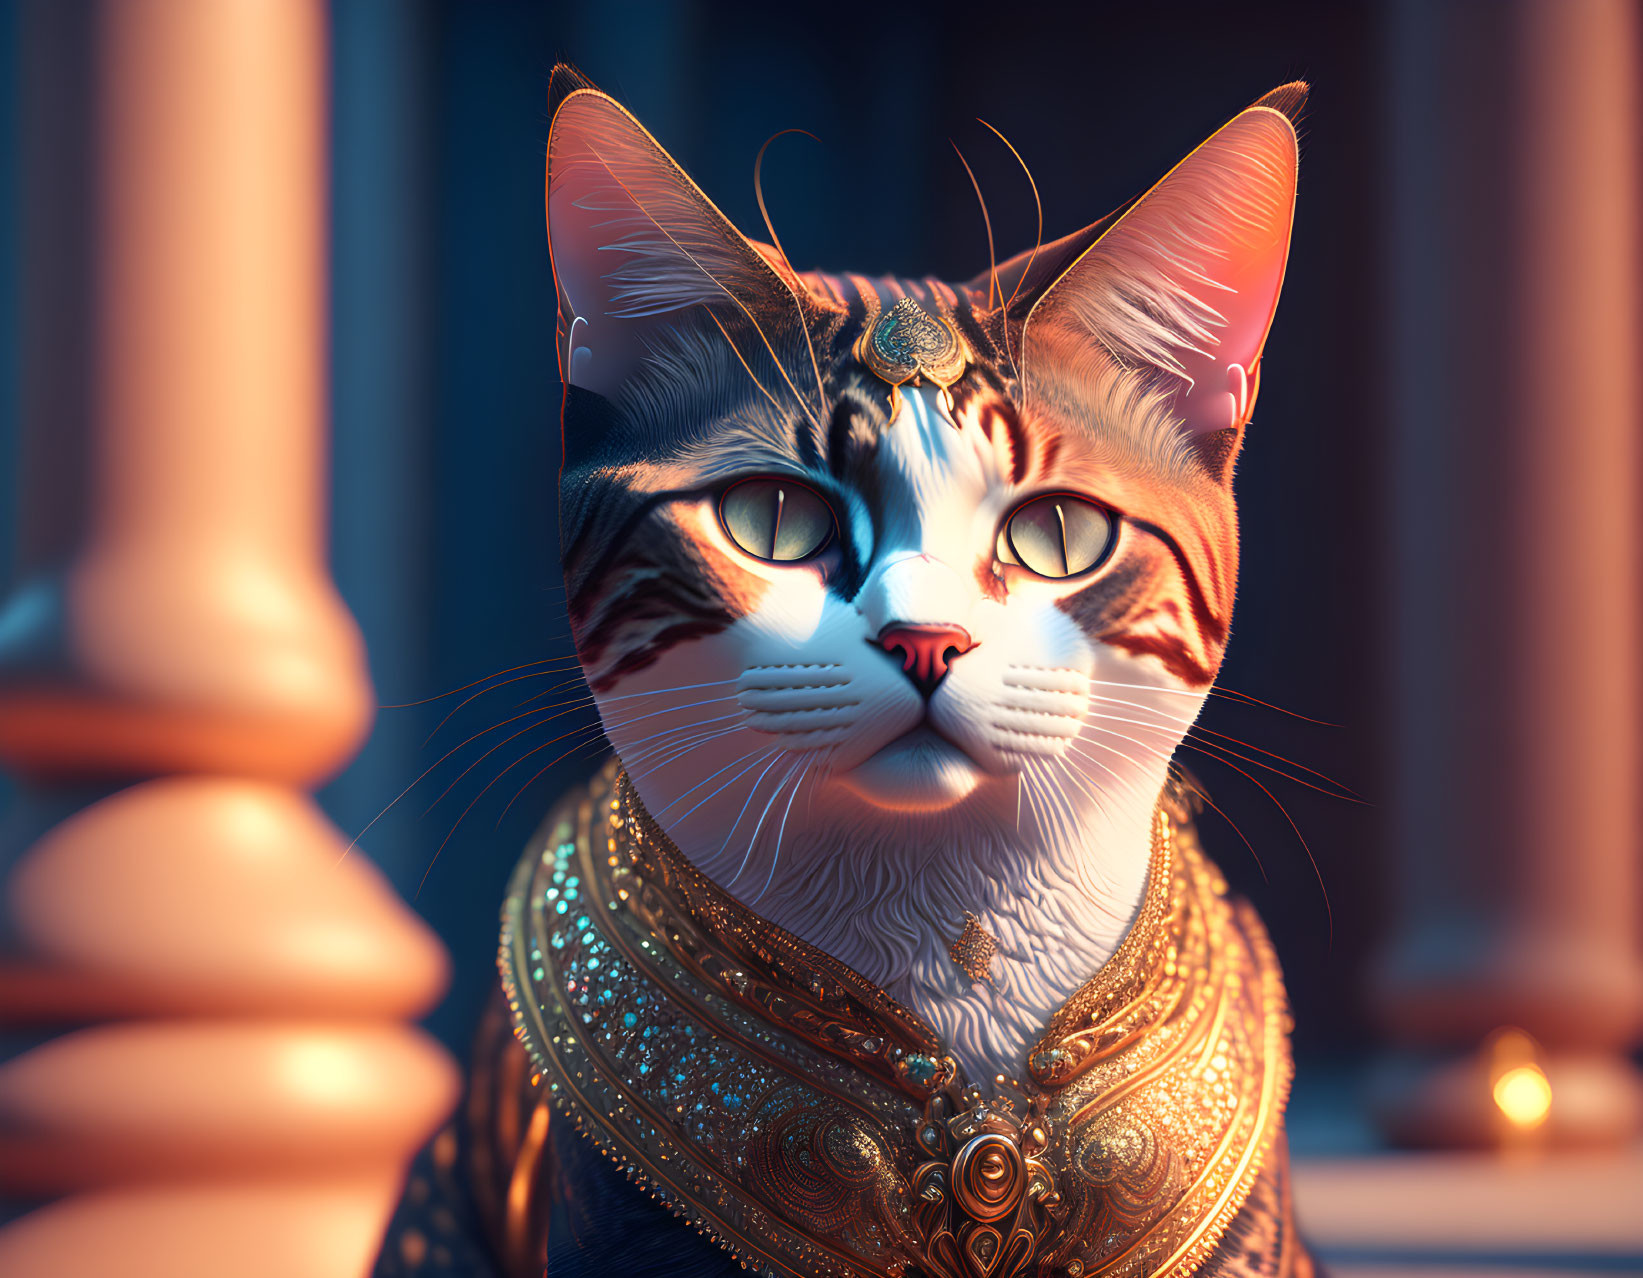 Elegantly adorned cat in intricate armor and majestic headdress against grand architecture.